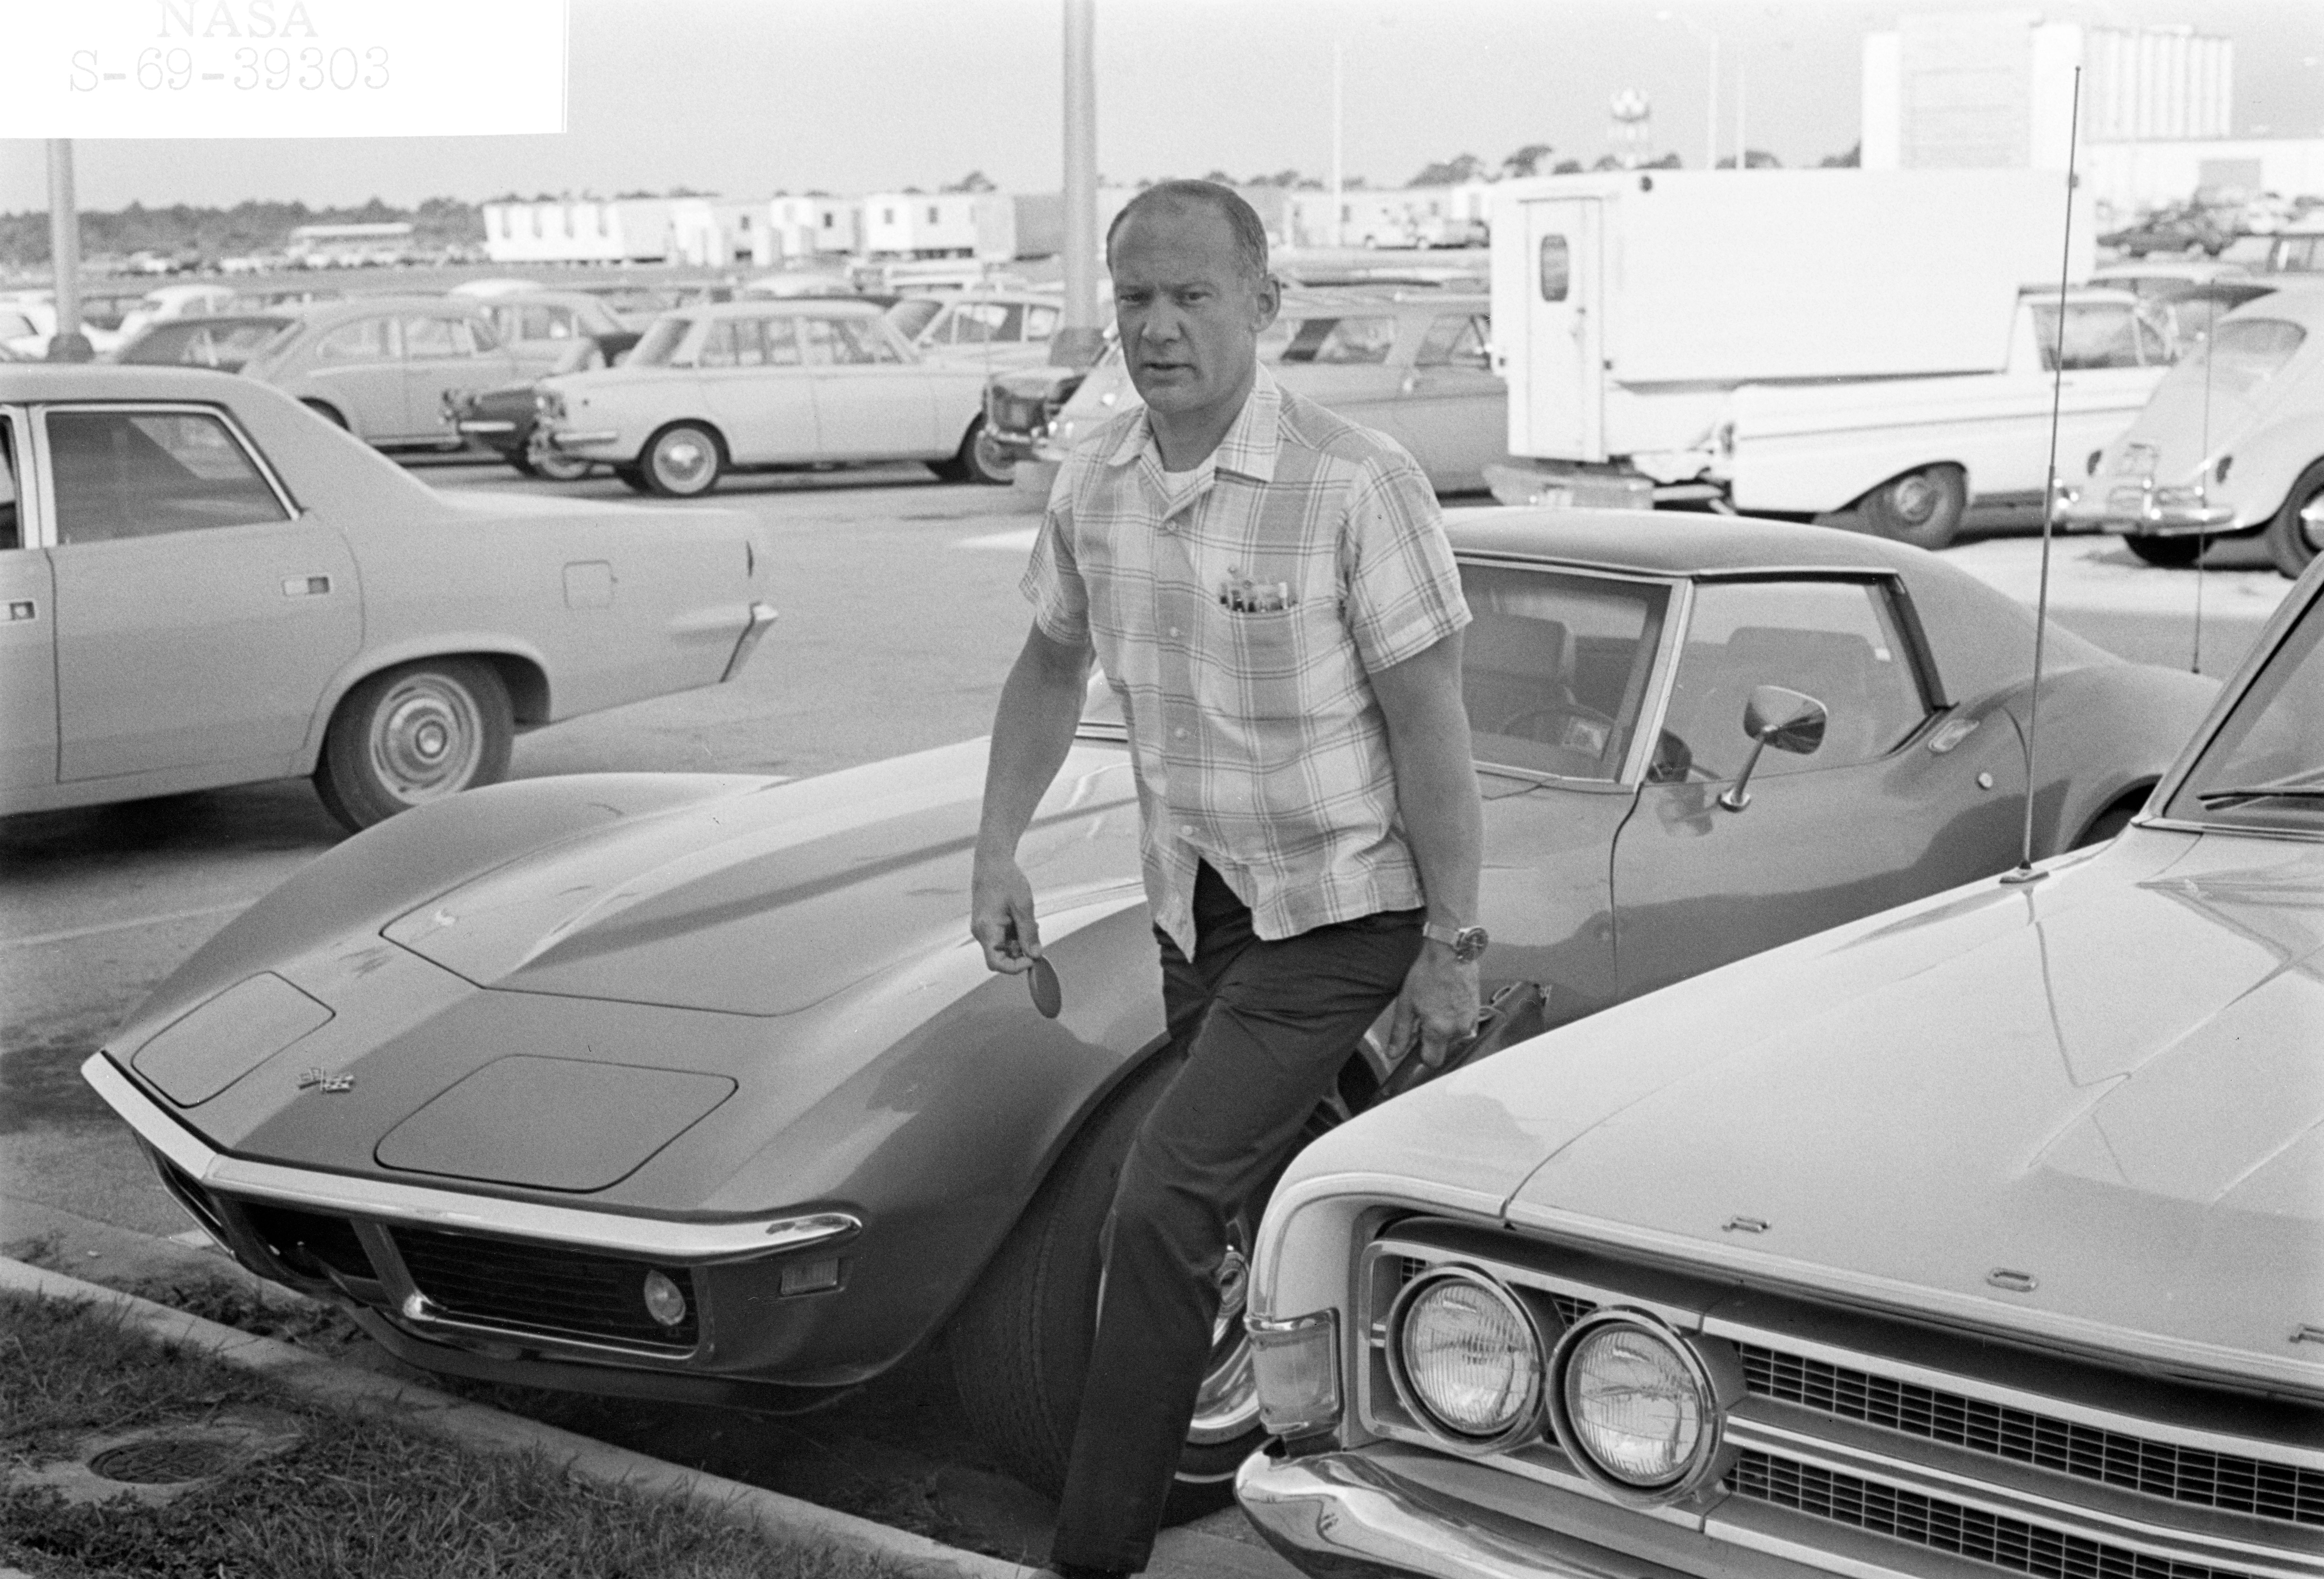 Apollo 11 astronauts Edwin E. “Buzz” Aldrin arrive for work at NASA’s Kennedy Space Center in Florida four days before launch